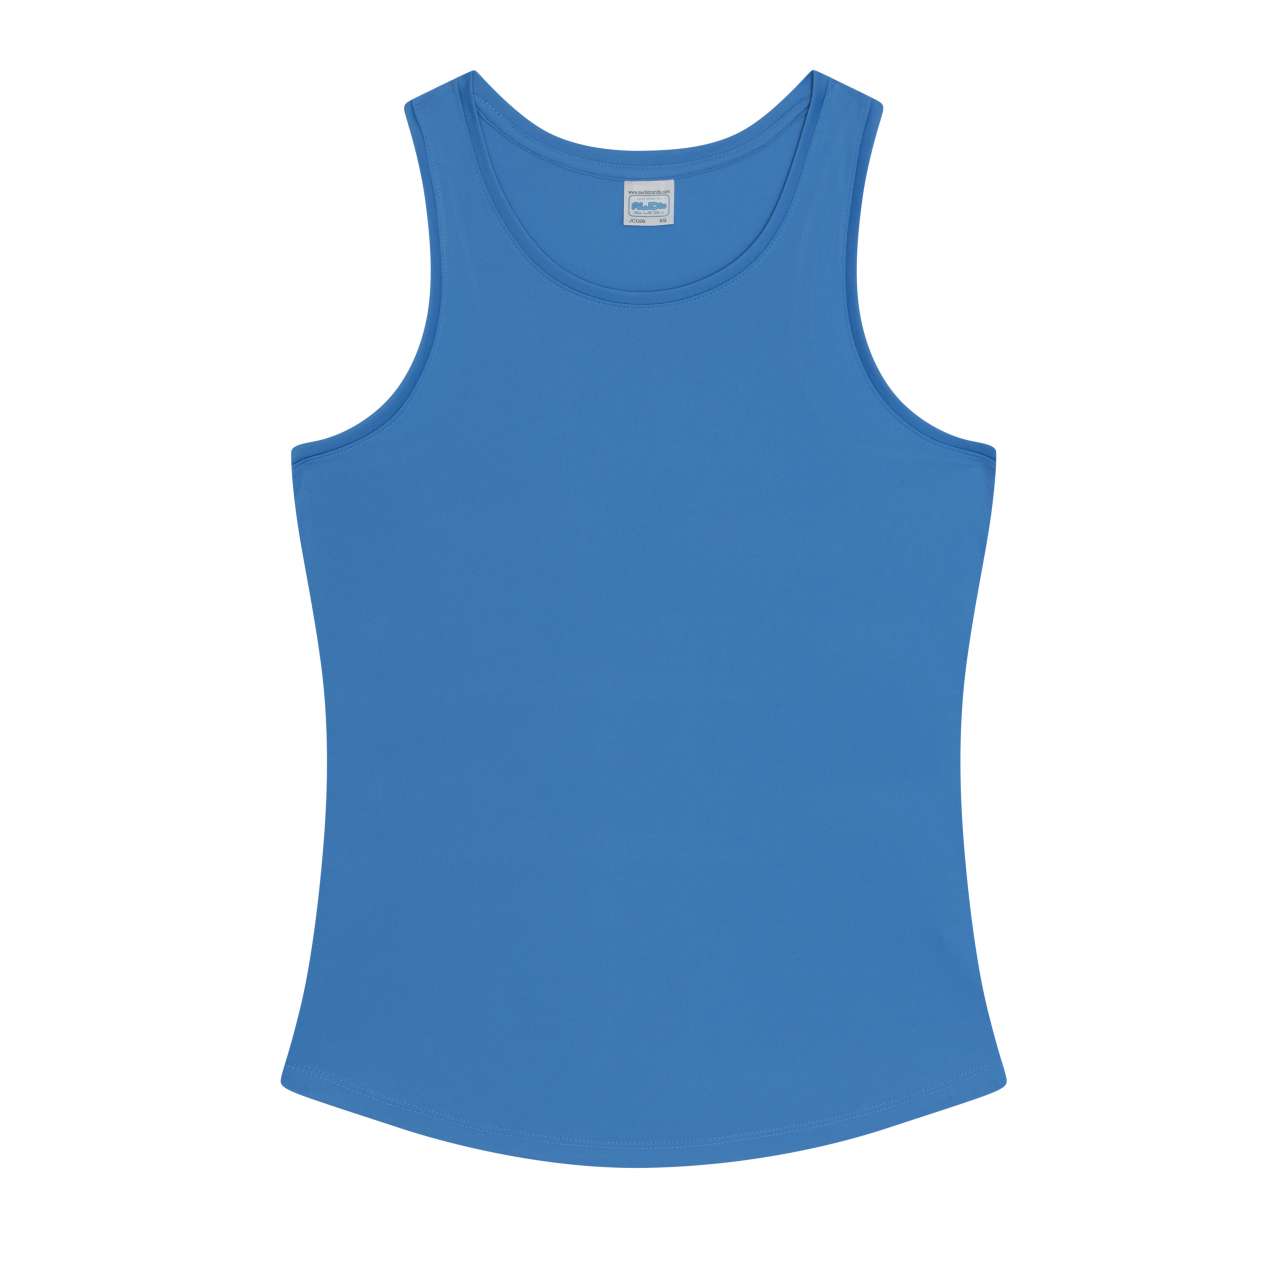 WOMEN'S COOL SMOOTH SPORTS VEST